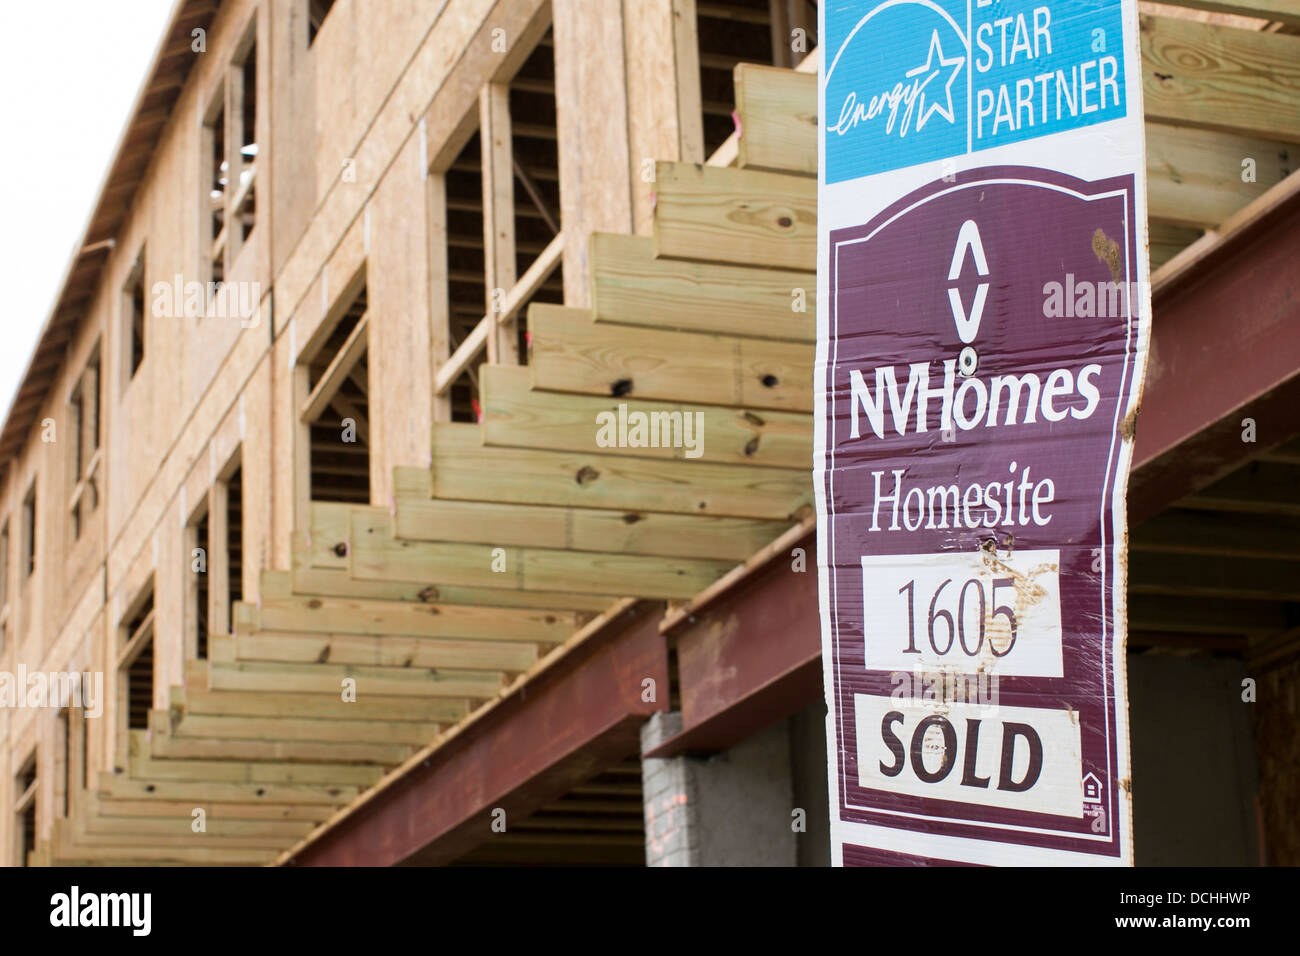 Construction of an NV Homes community with 'sold' signs.  Stock Photo